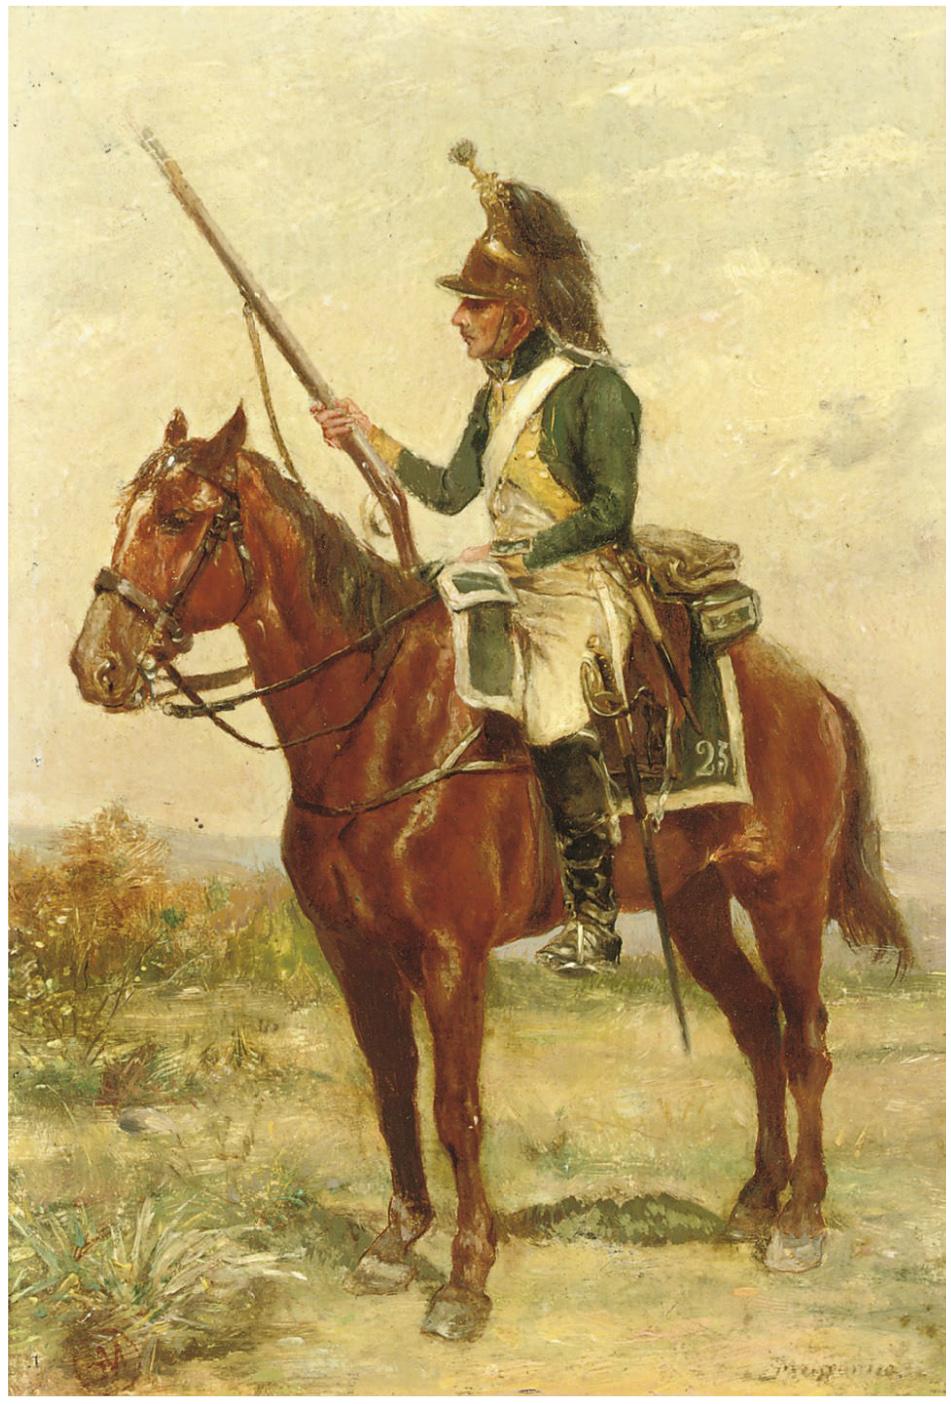 Letters of Désiré Trefcon, quartermaster in the 22nd Dragoons – 1806-1807